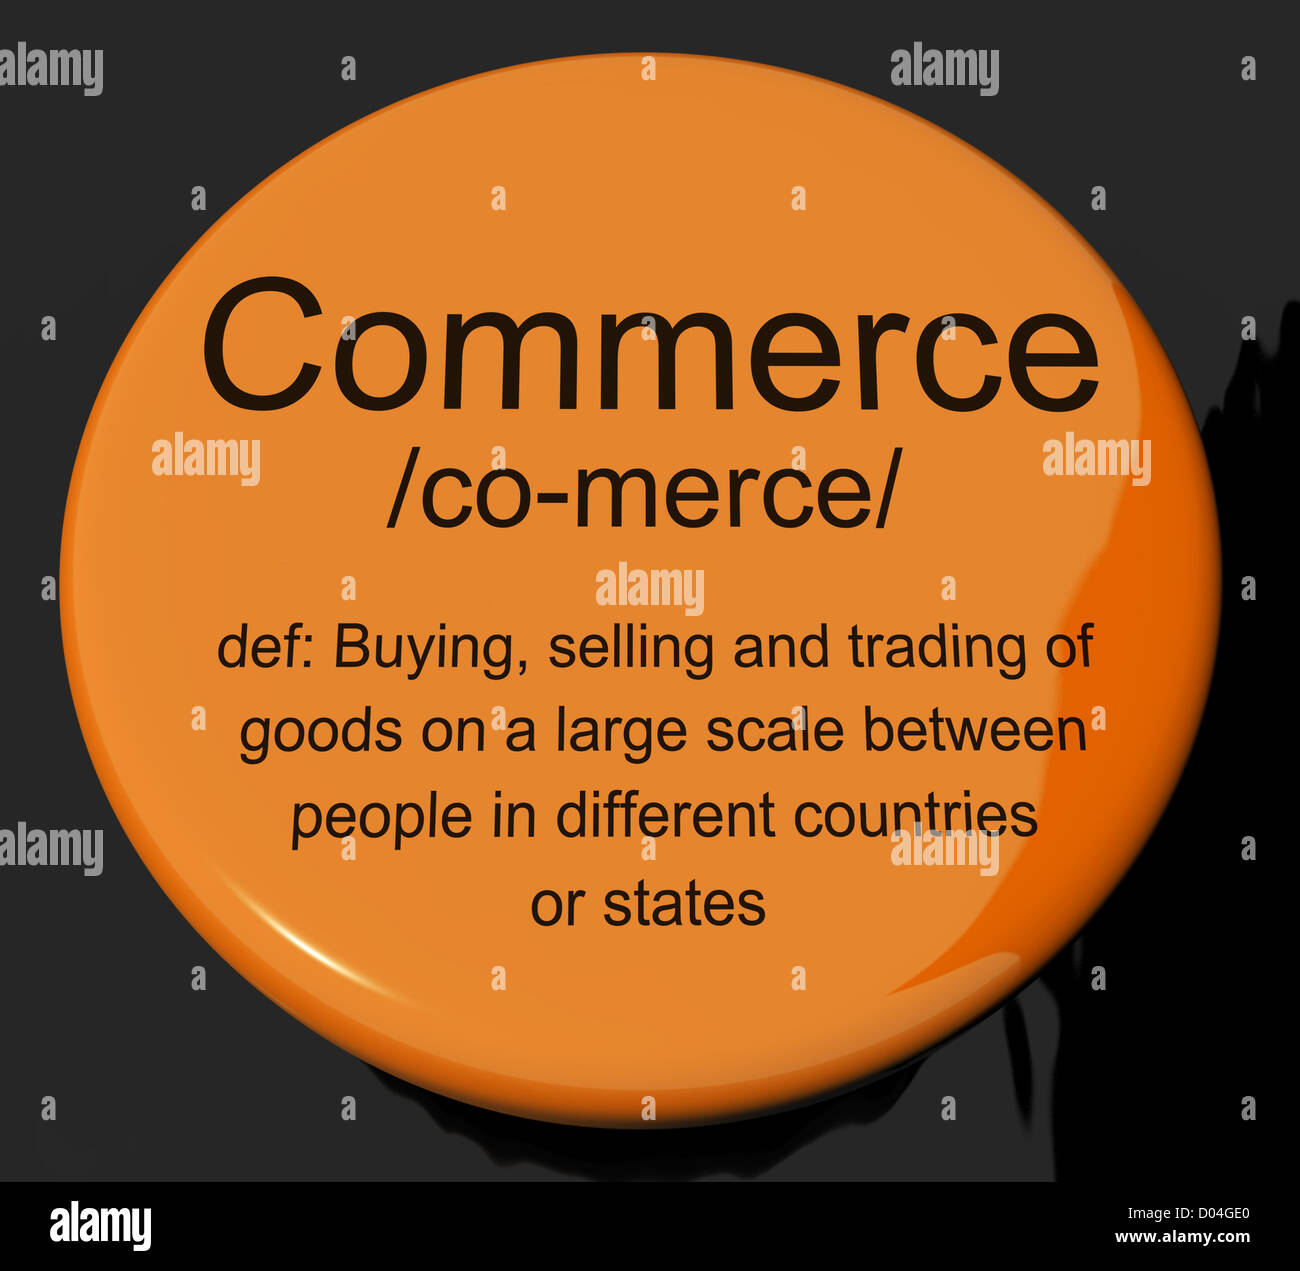 Commerce Definition Button Shows Trading Buying And Selling Stock Photo